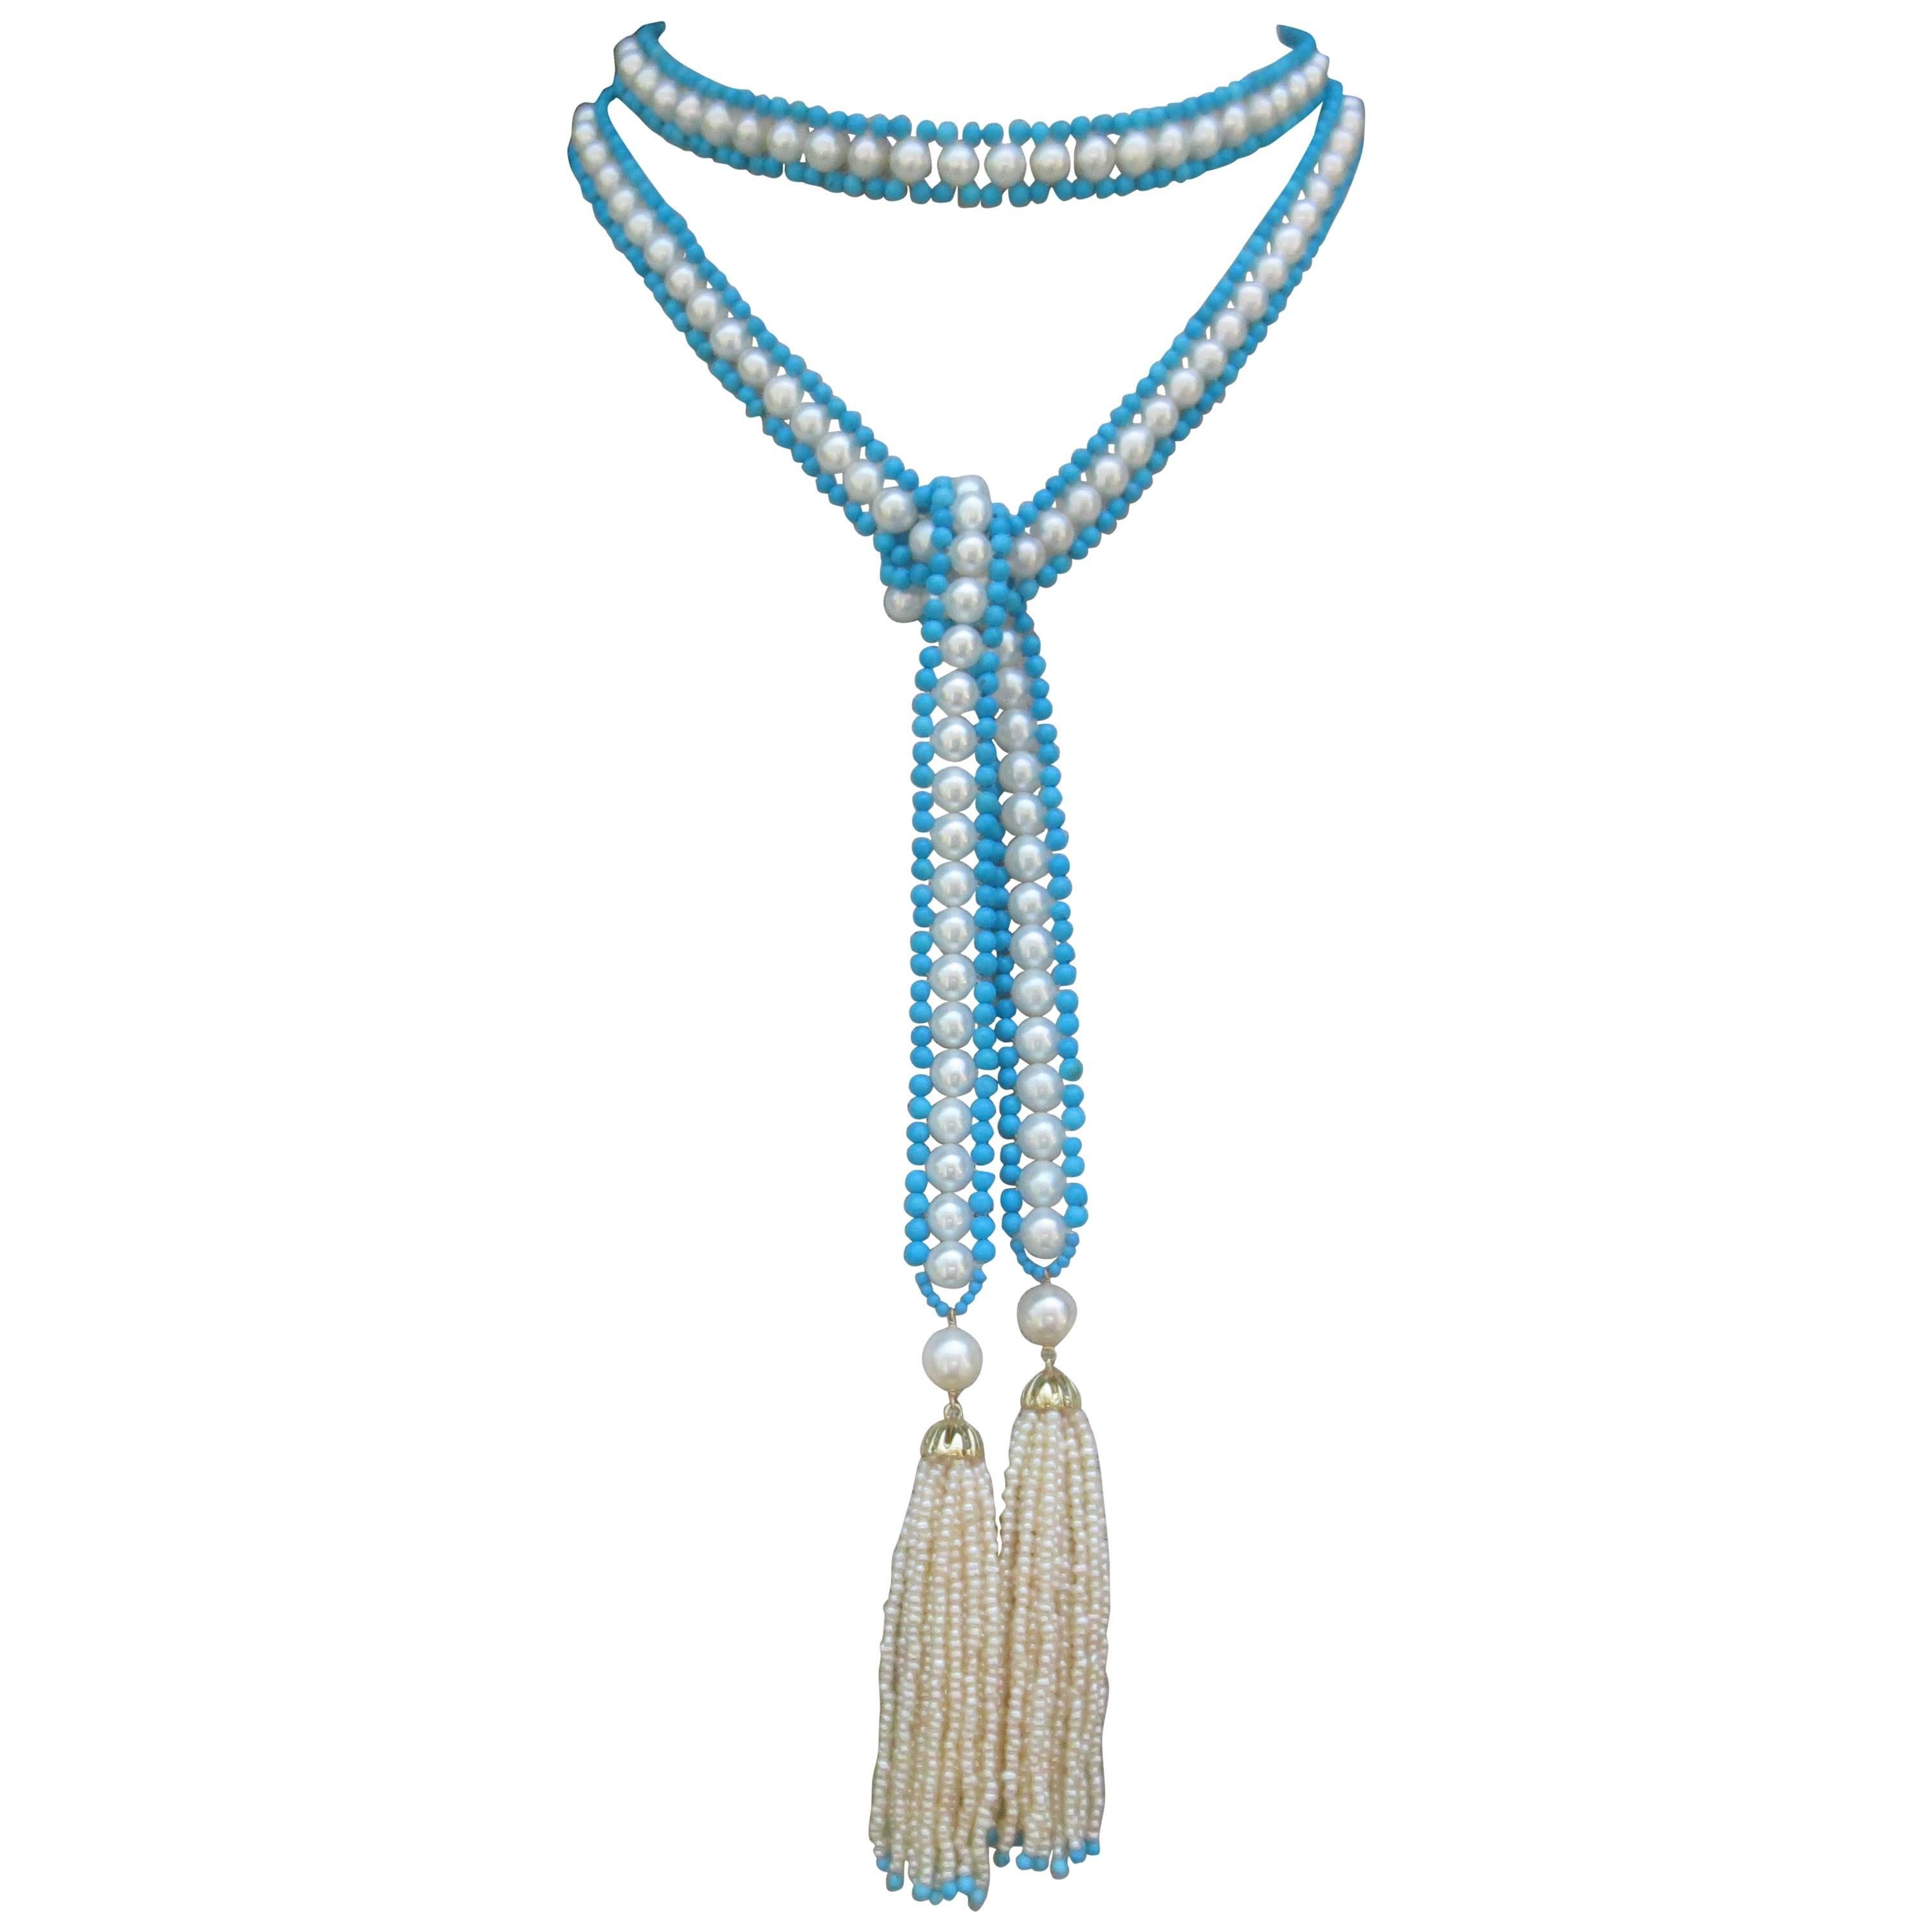 Multi-functional and timeless, this Sautoir is designed to fit any occasion. The ribbon is made by tightly weaving 6mm pearls with 3mm Turquoise beads into a symmetrical weave, resulting in a durable and versatile experience. Finished with graduated